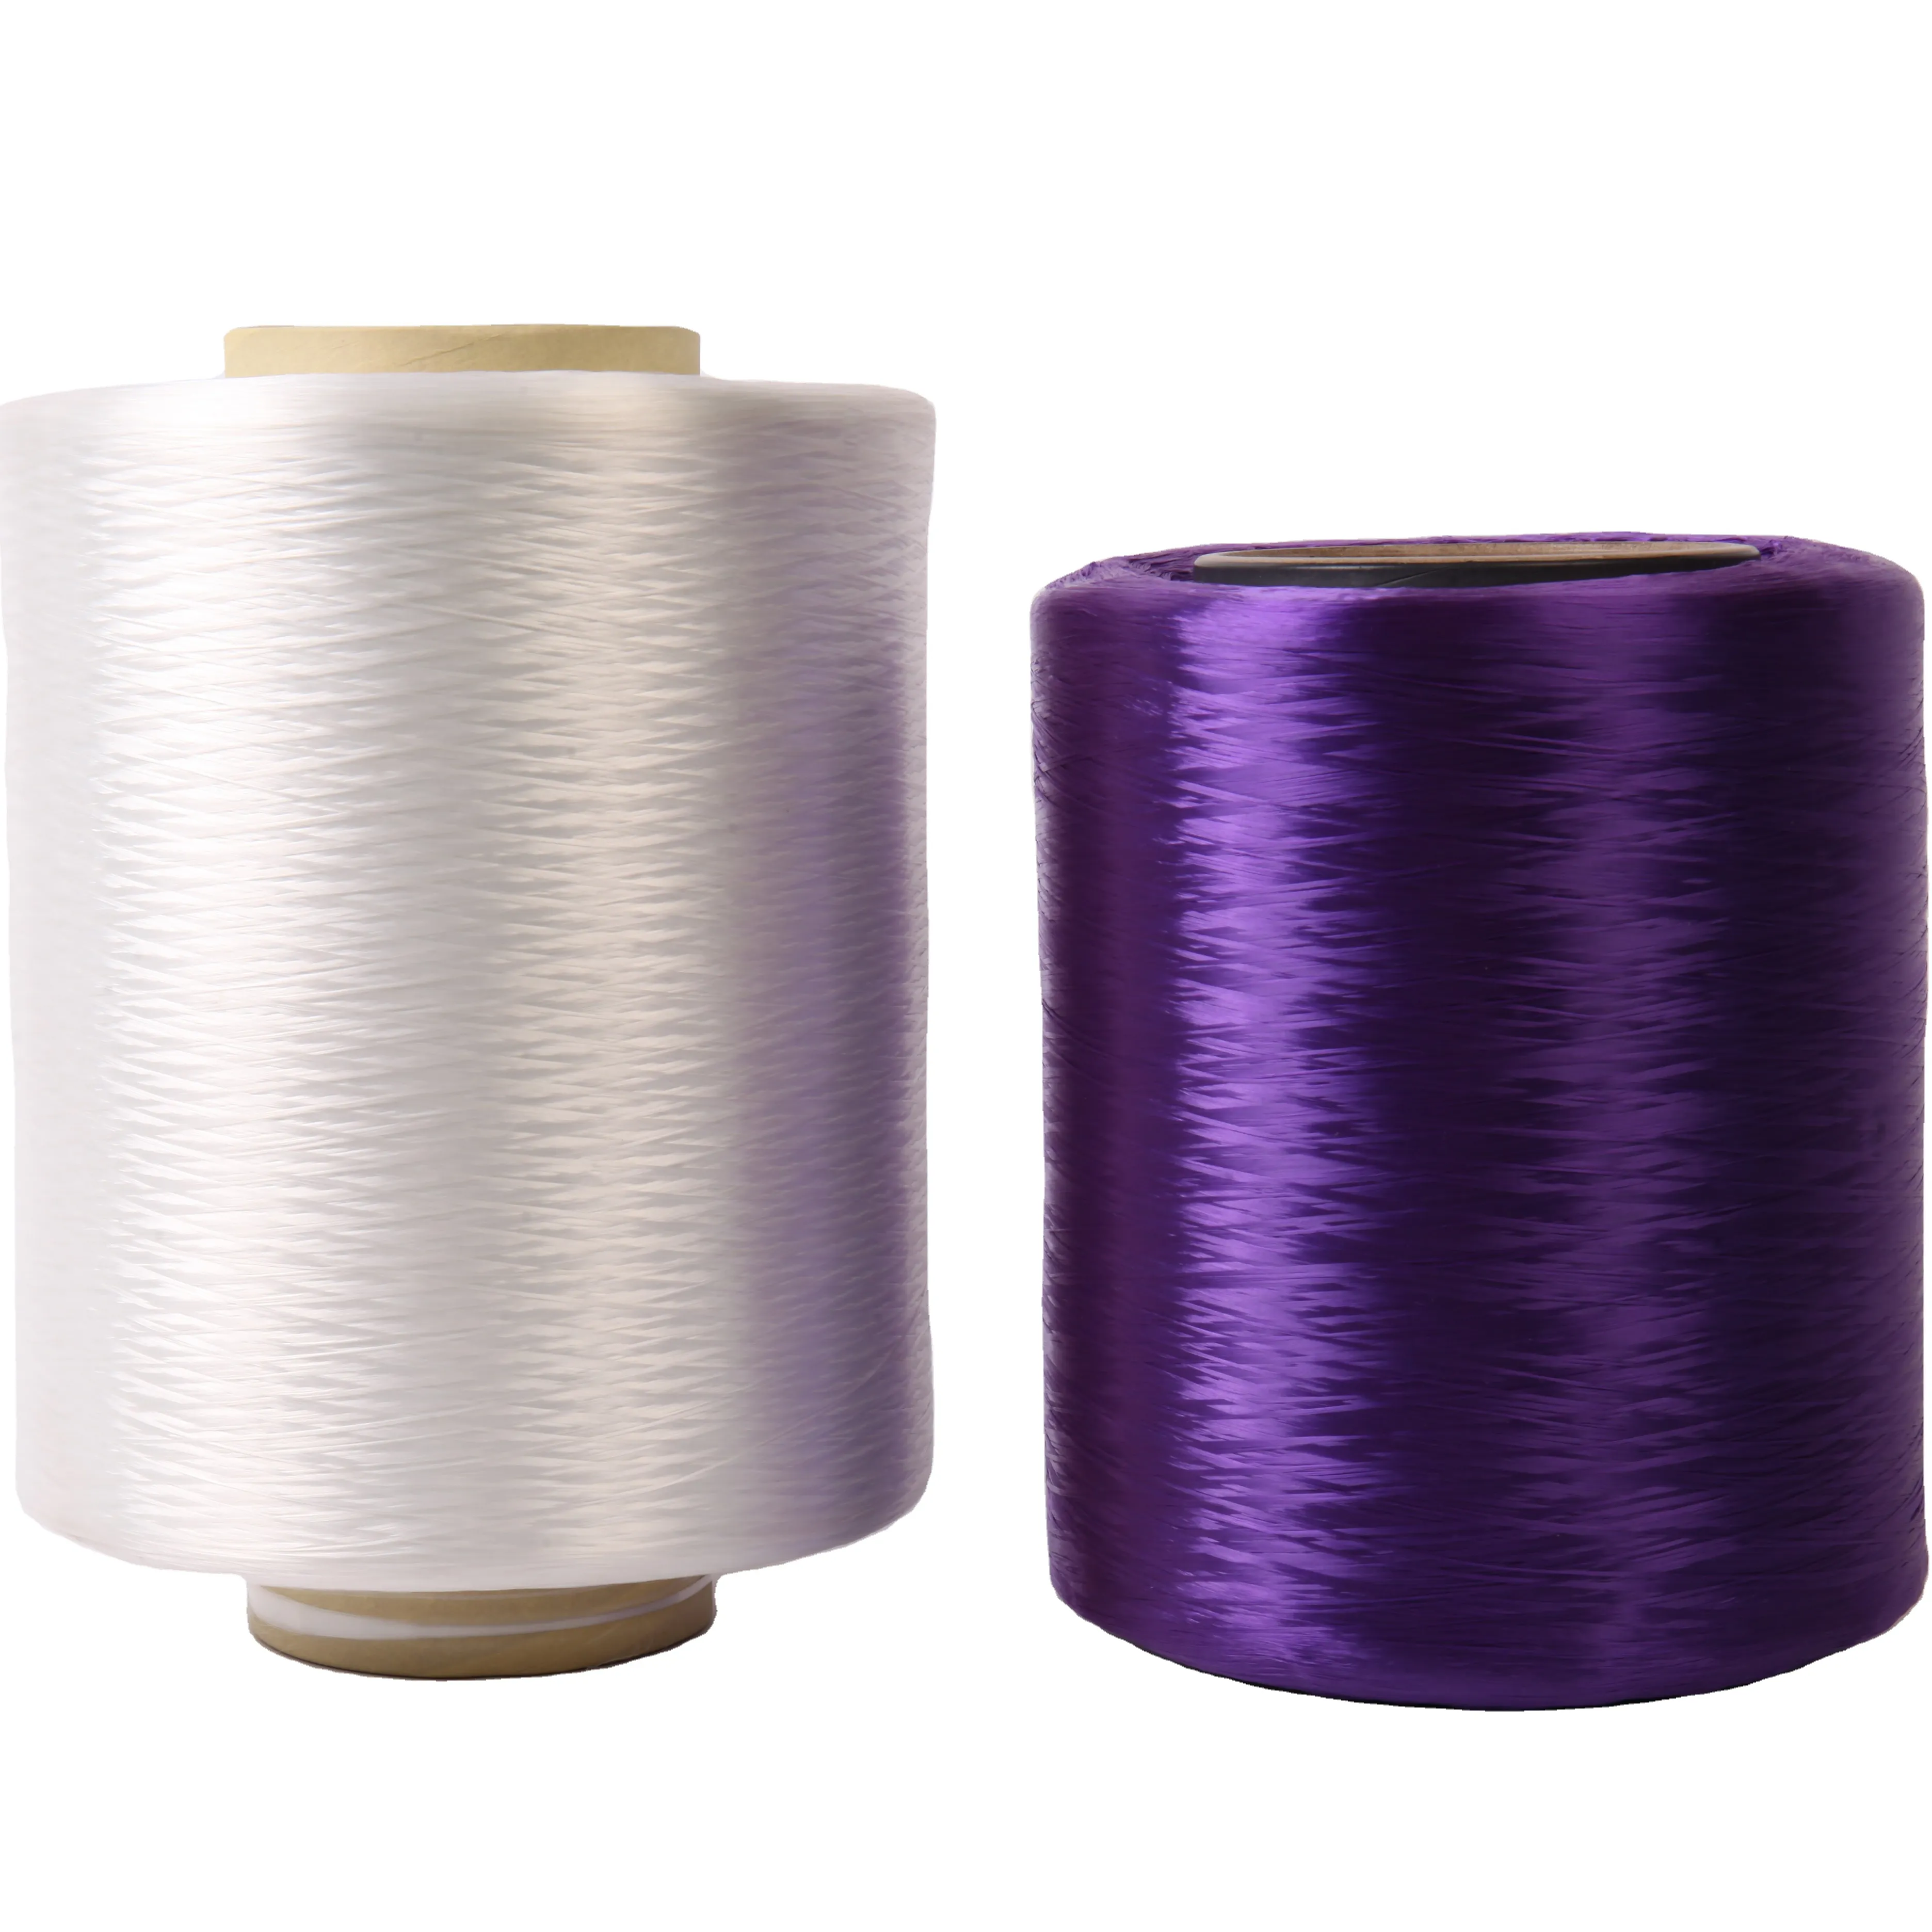 100% polyester poliester multifilamento fdy recycle filament yarns 1100 dtex 2200dtex 3300dtex